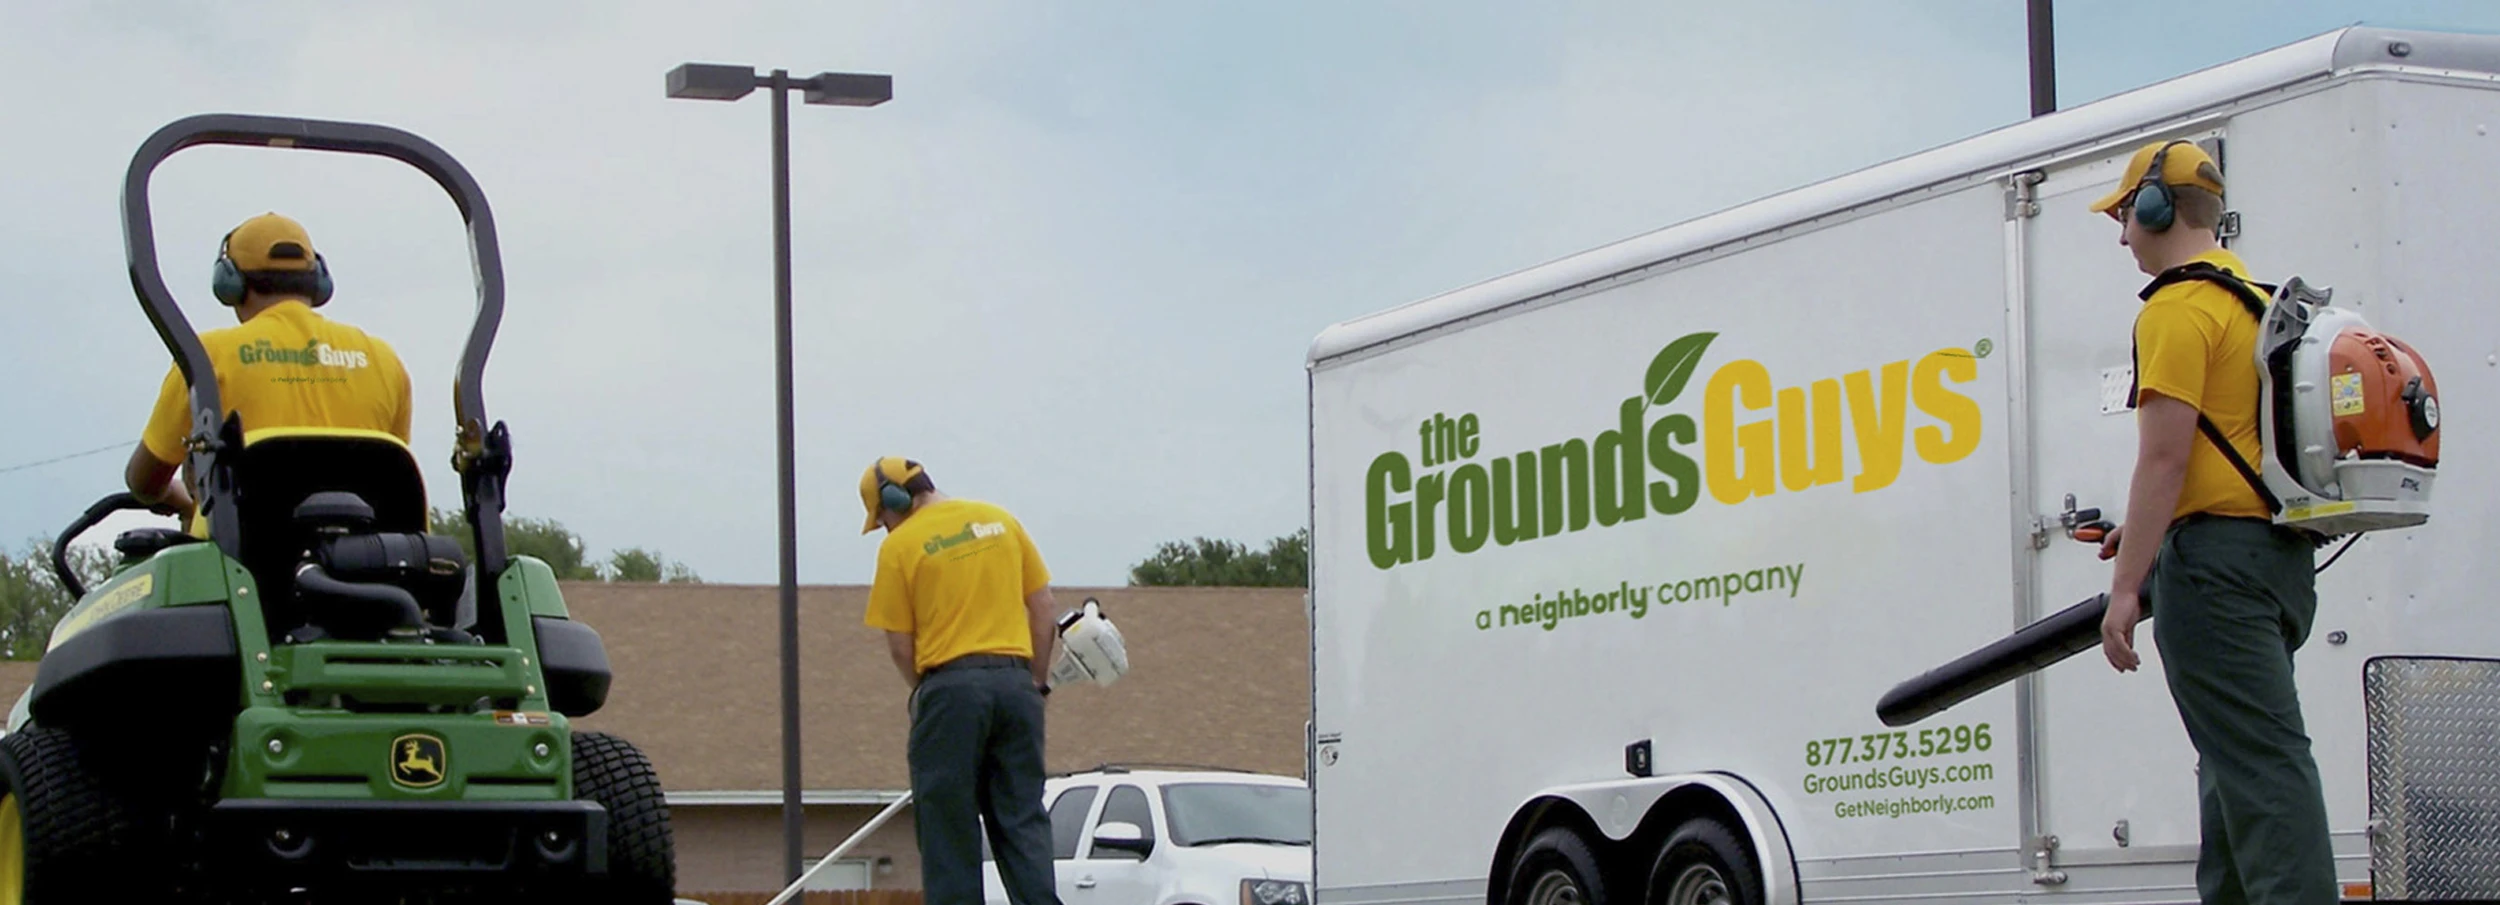 Three Grounds Guys employees performing lawn cleanup work next to a branded company trailer.